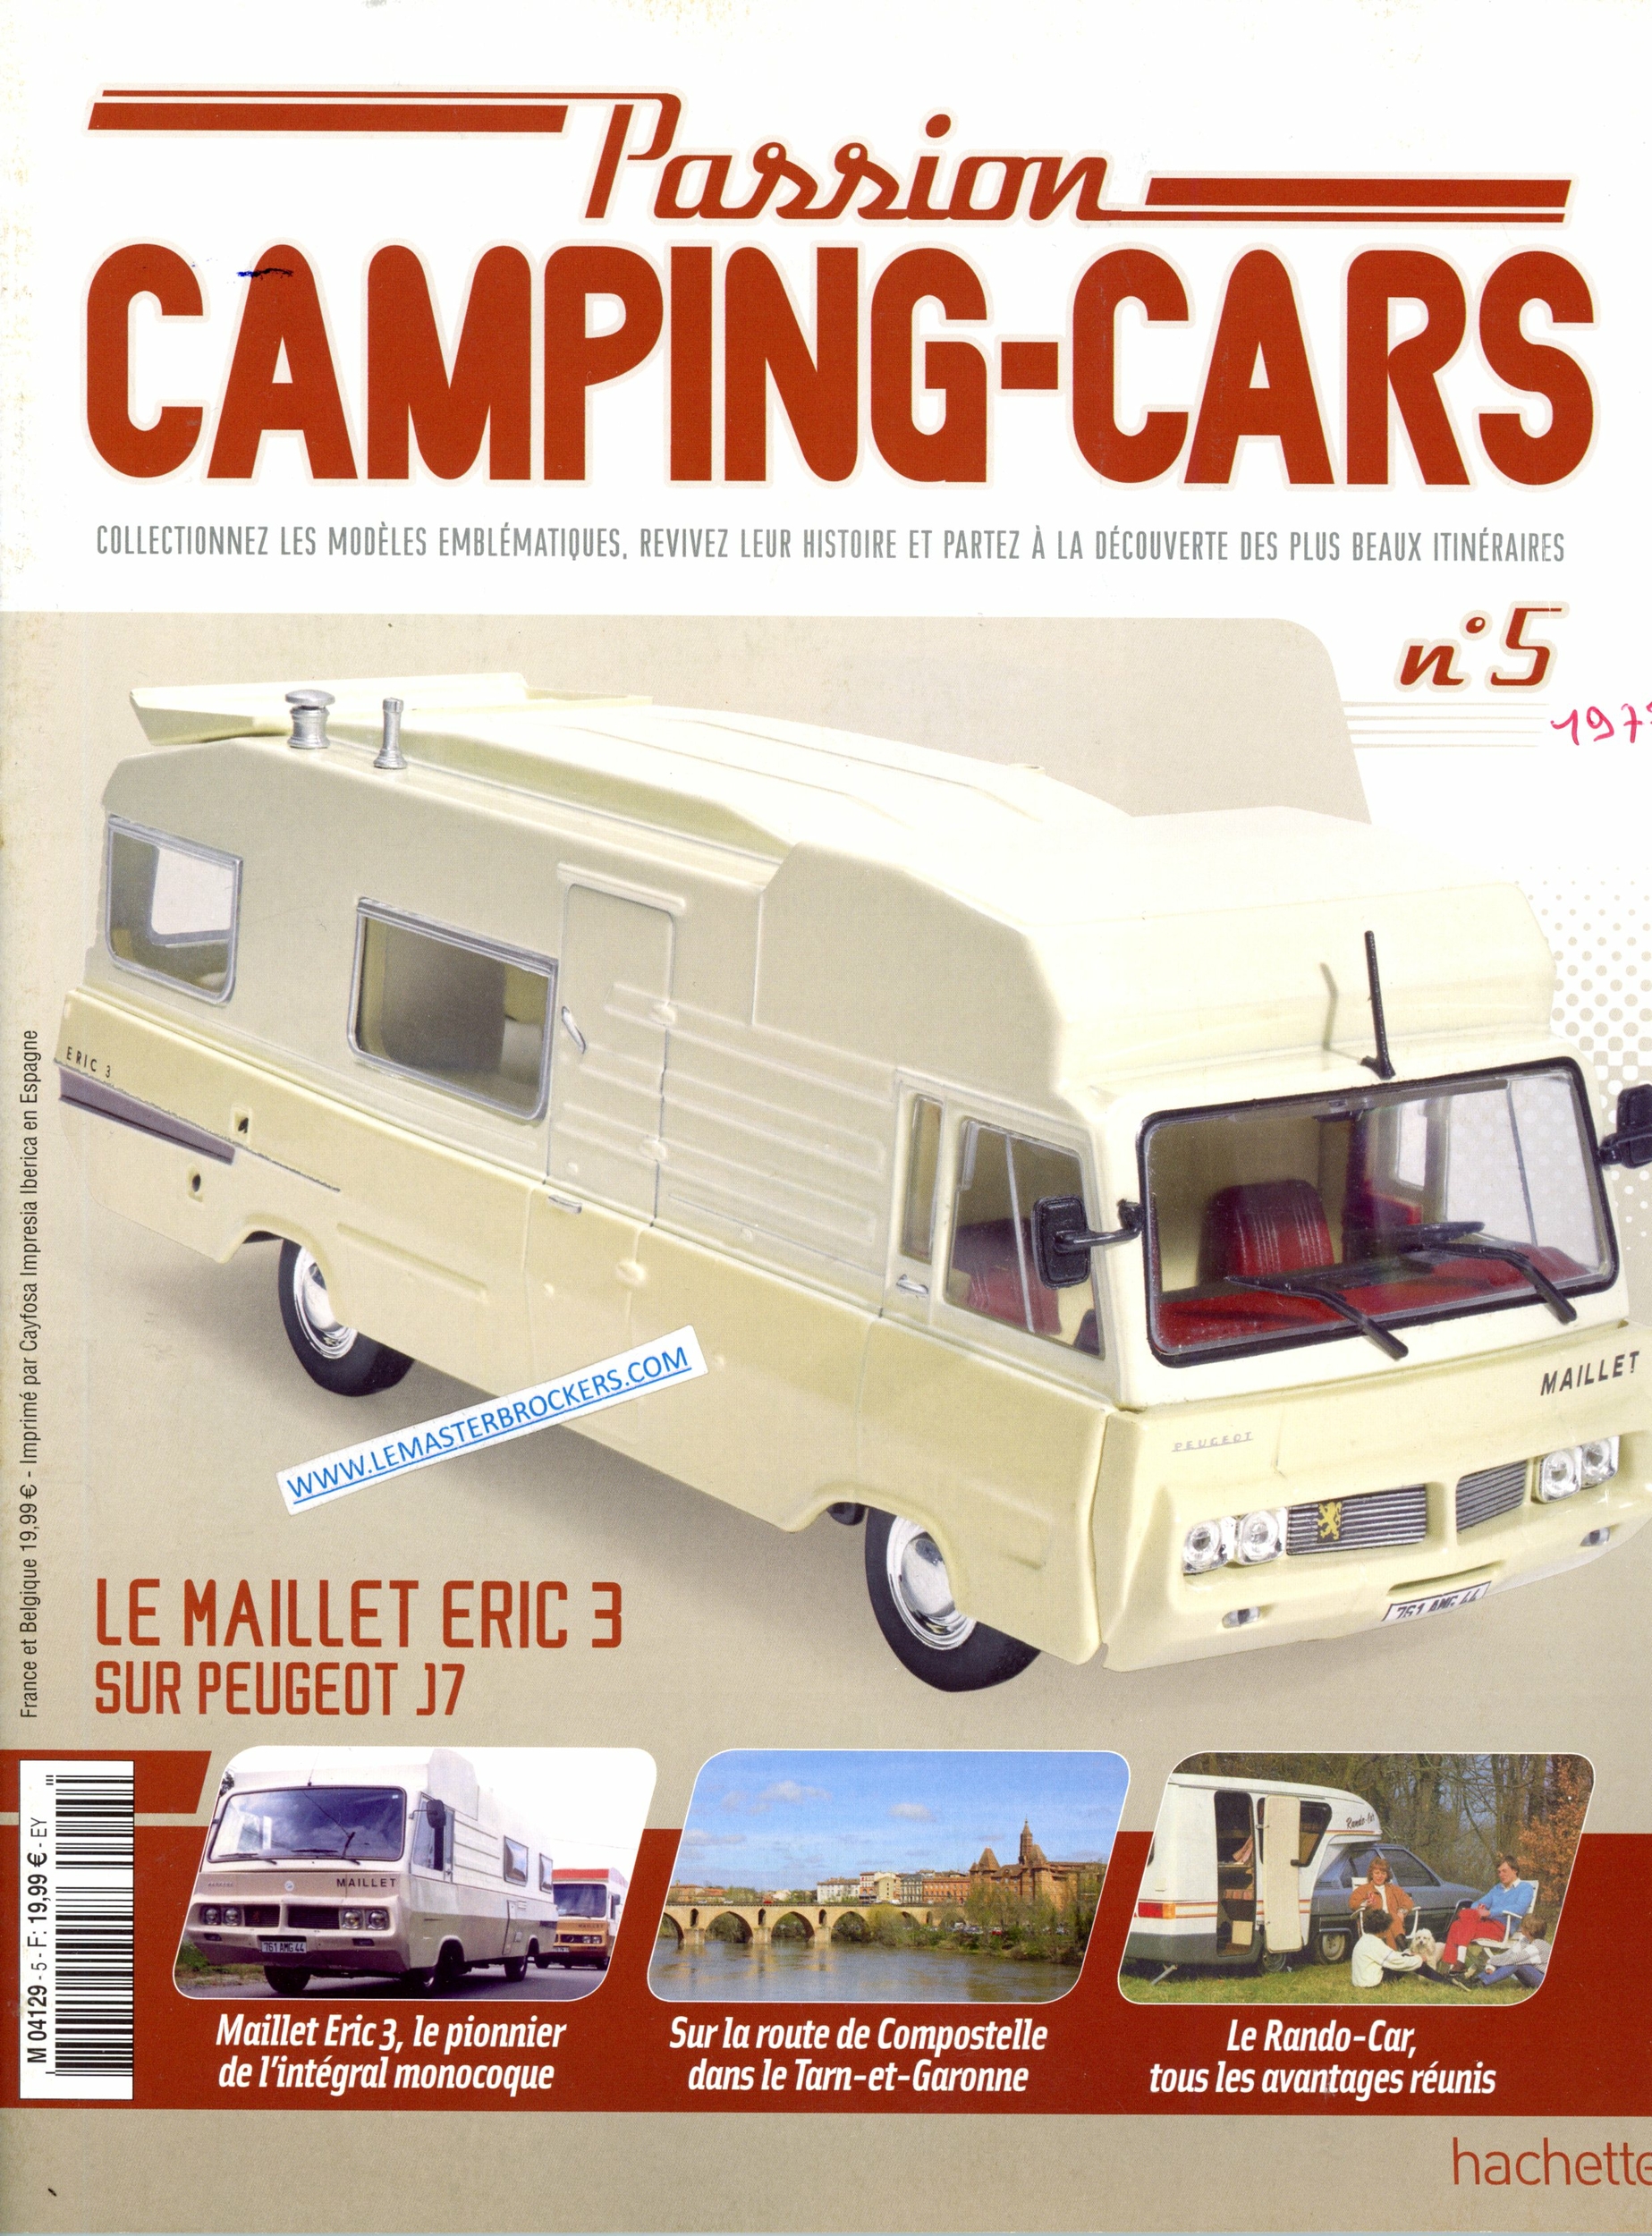 MAILLET ERIC 3 PEUGEOT J7 PASSION CAMPING-CARS